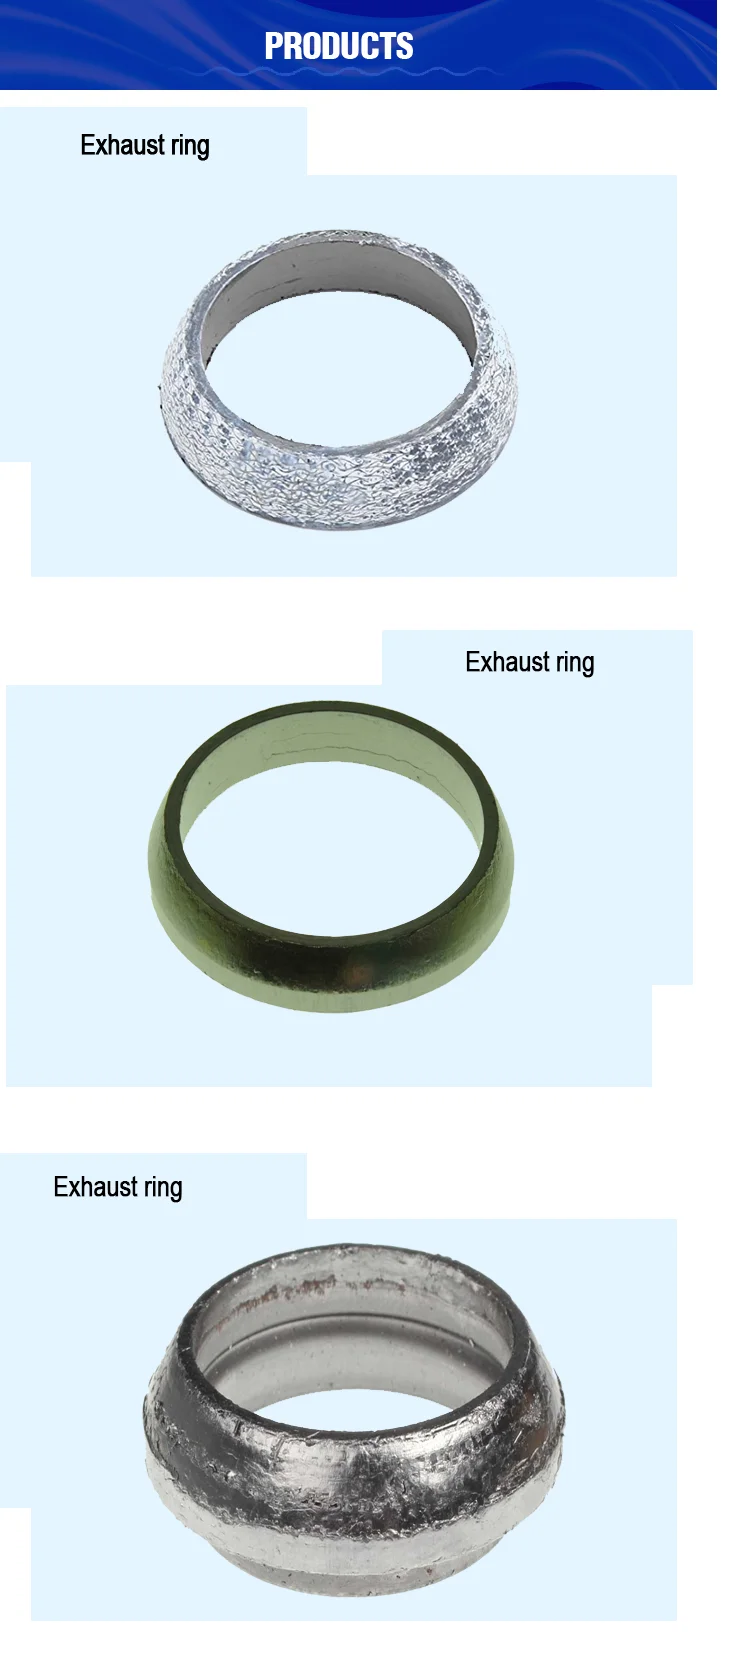 Exhaust Ring Gasket 3 Donut Exhaust Gasket Conical Mesh Seal For Tube Buy Exhaust Manifold Gasket O Ring Exhaust Pipe Flange Gaskets Donut Donut Exhaust Pipe Flange Gasket Product On Alibaba Com